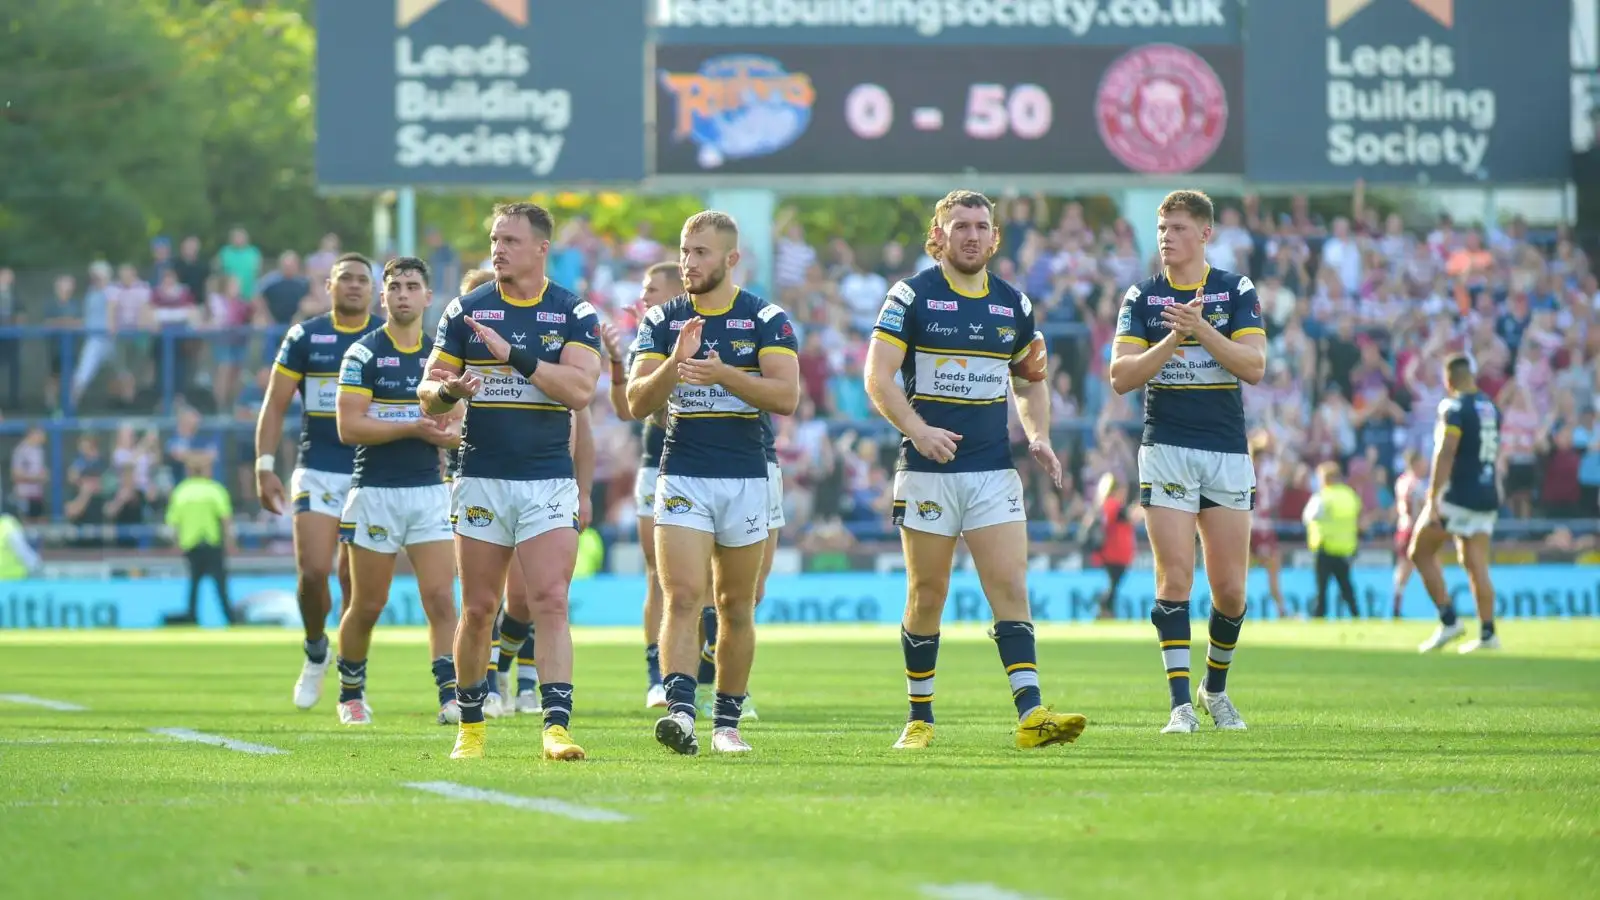 Leeds Rhinos humiliated once again with grim statistic and unwanted records – five takeaways as Catalans dominate